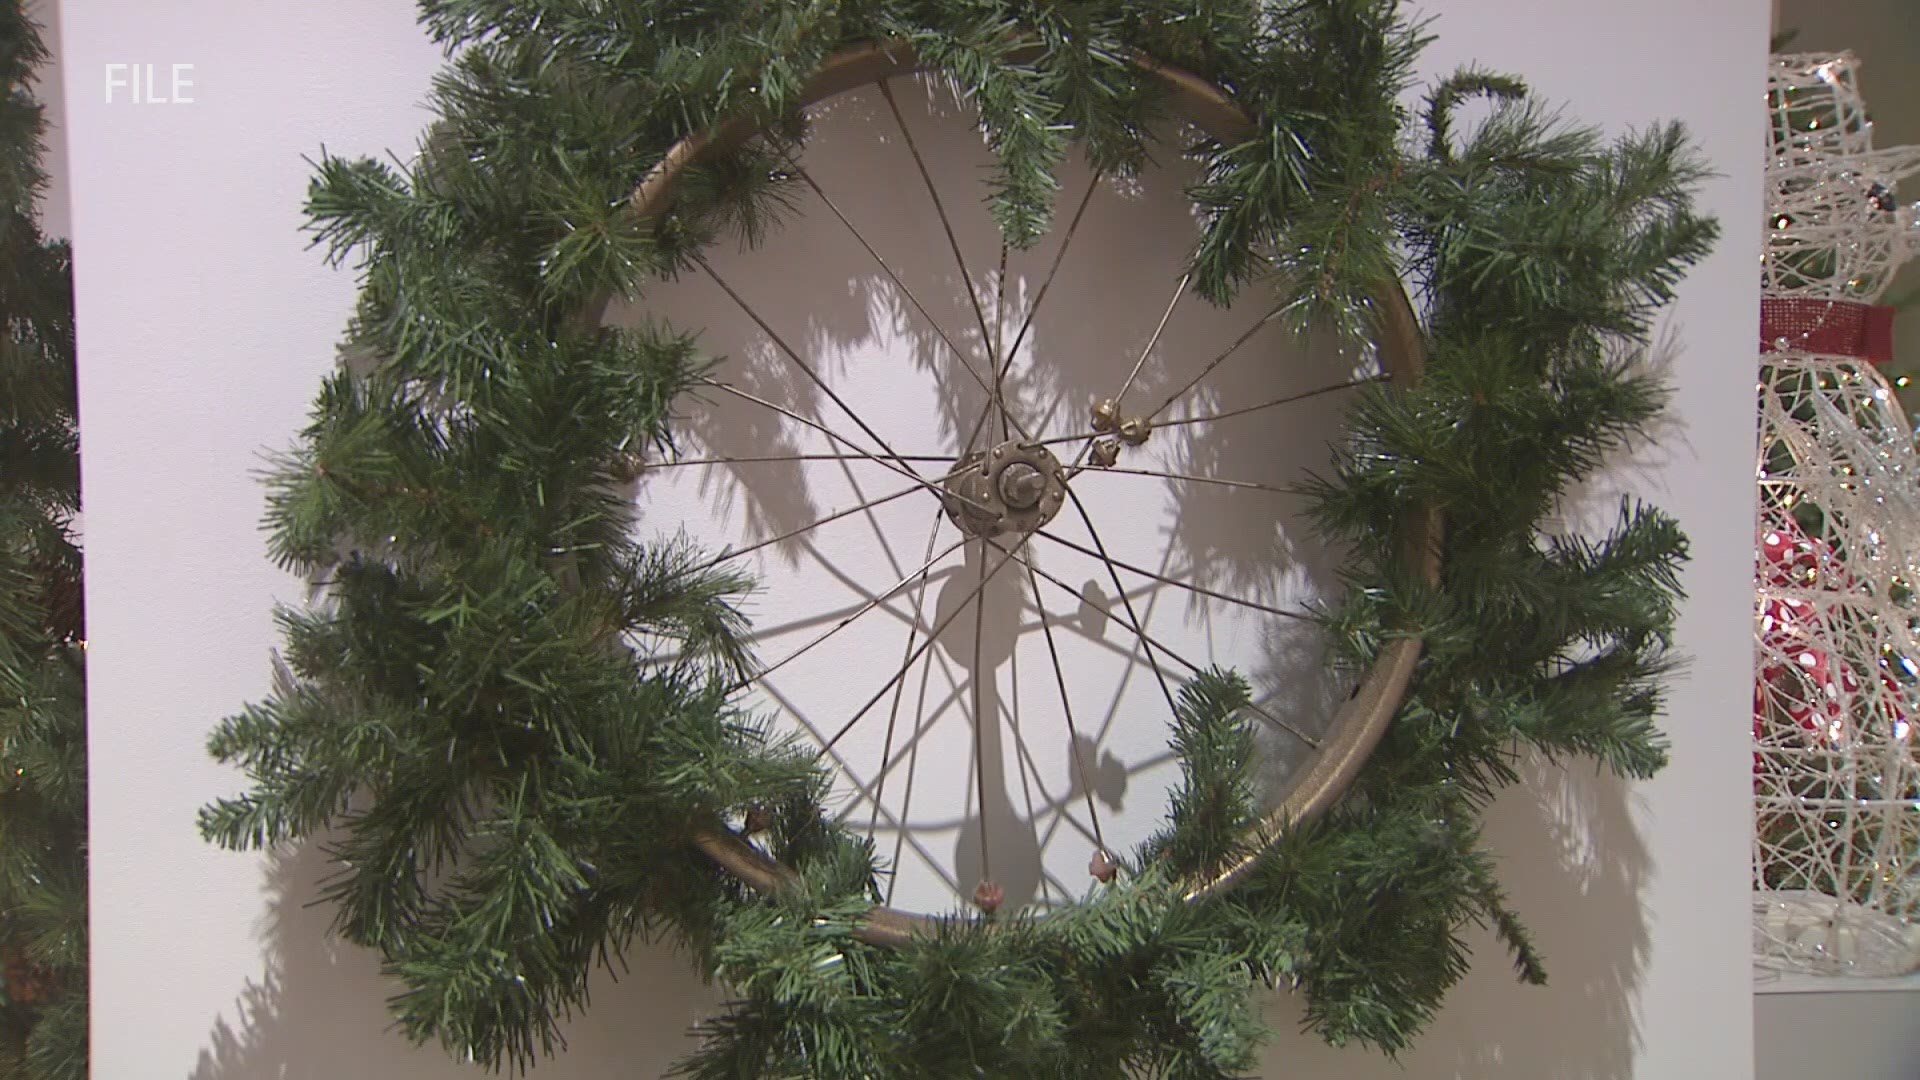 Decorative wreaths will hang in the windows of downtown Muskegon businesses from Nov. 24 through Dec. 6.